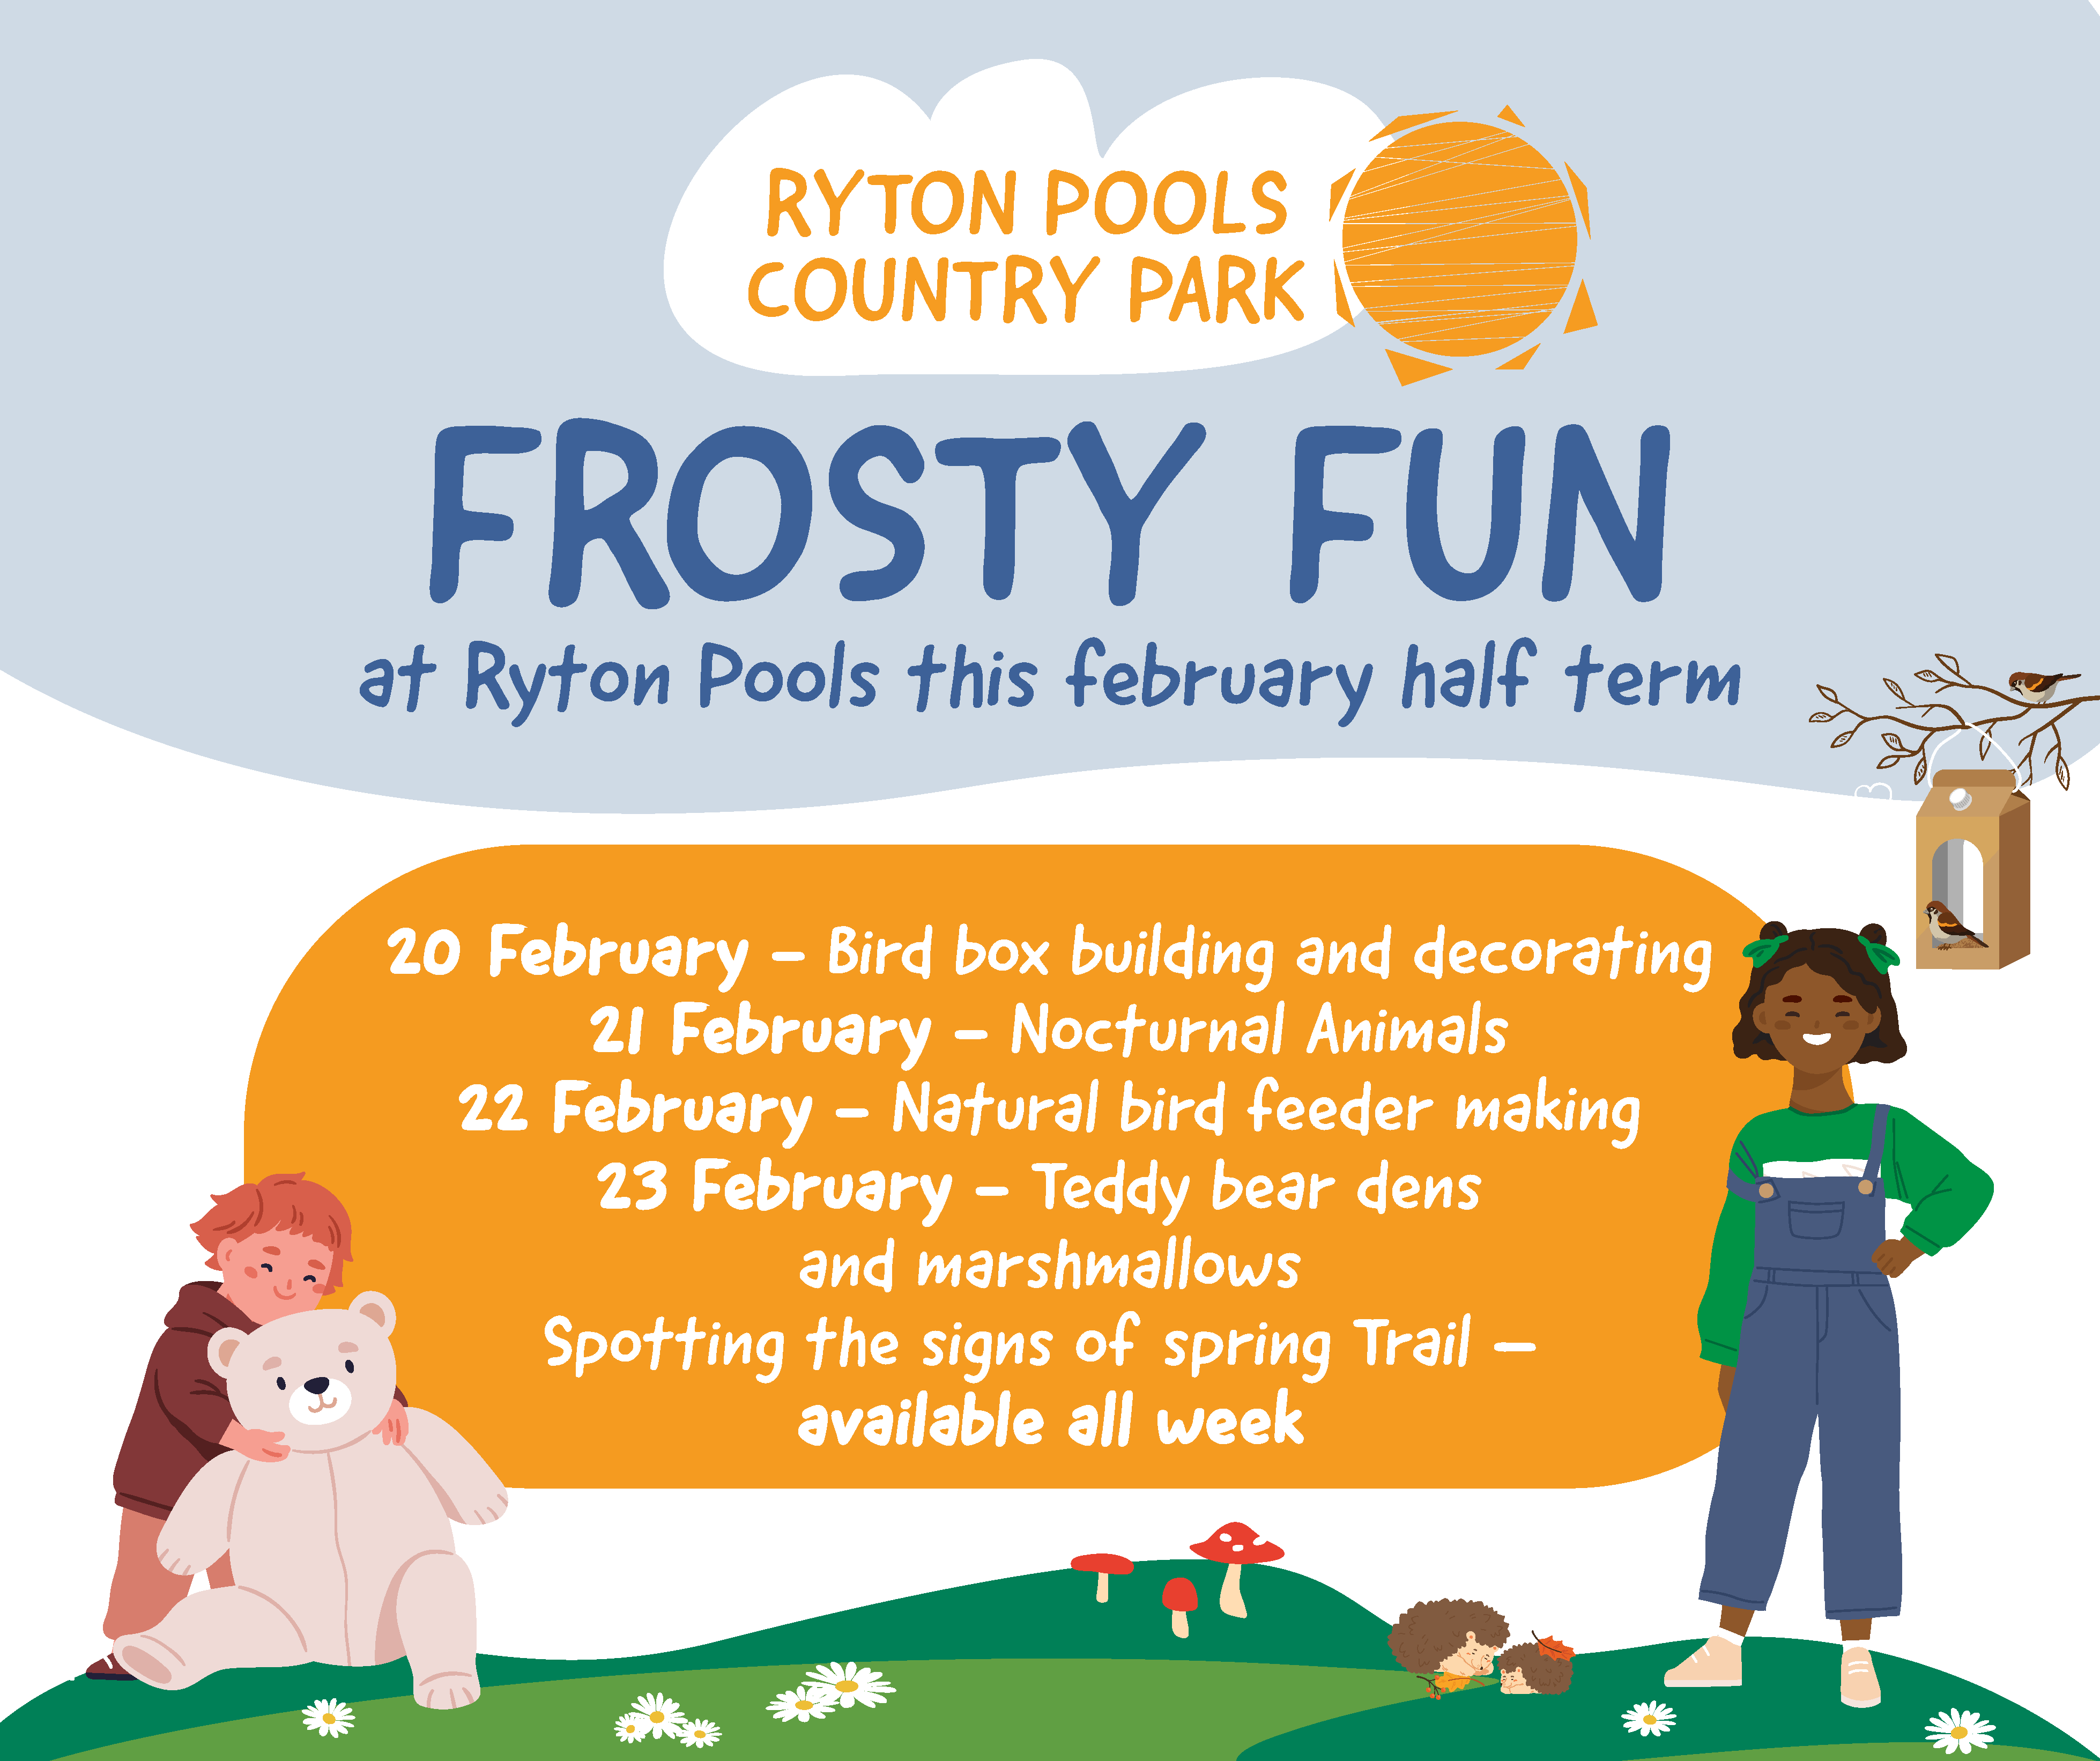 Frosty Fun this february half-term at Ryton Pools Country Park